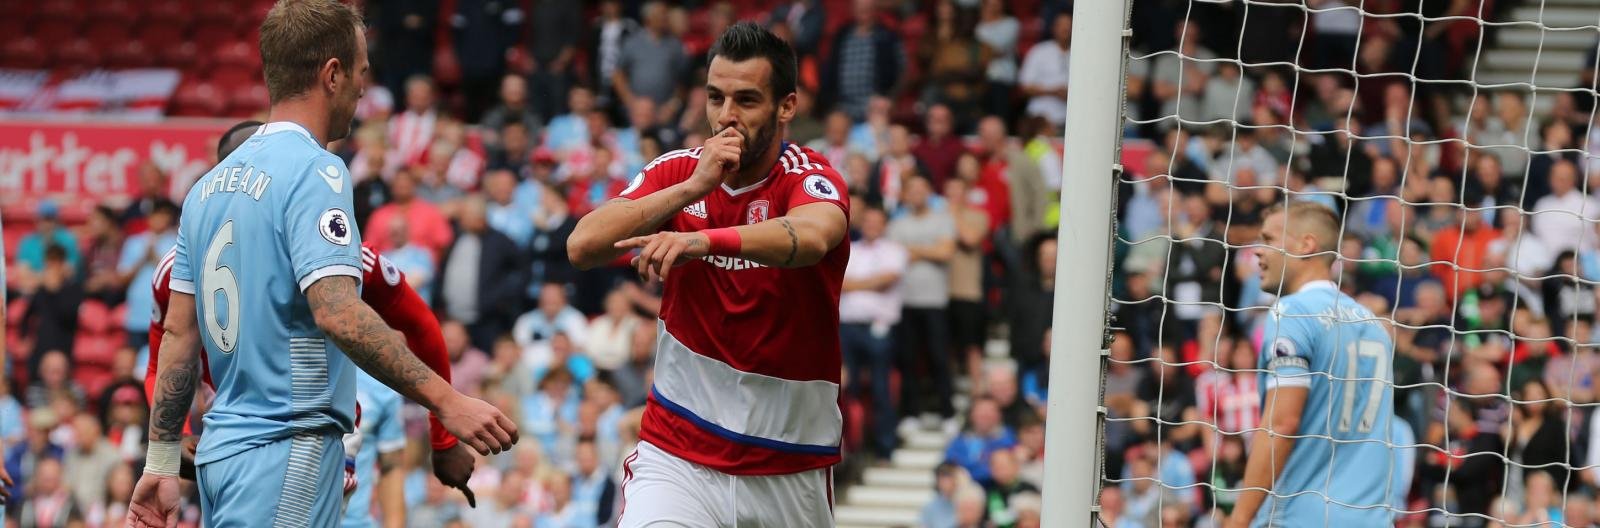 Alvaro Negredo’s immediate impact shows how important he’ll be for Middlesbrough